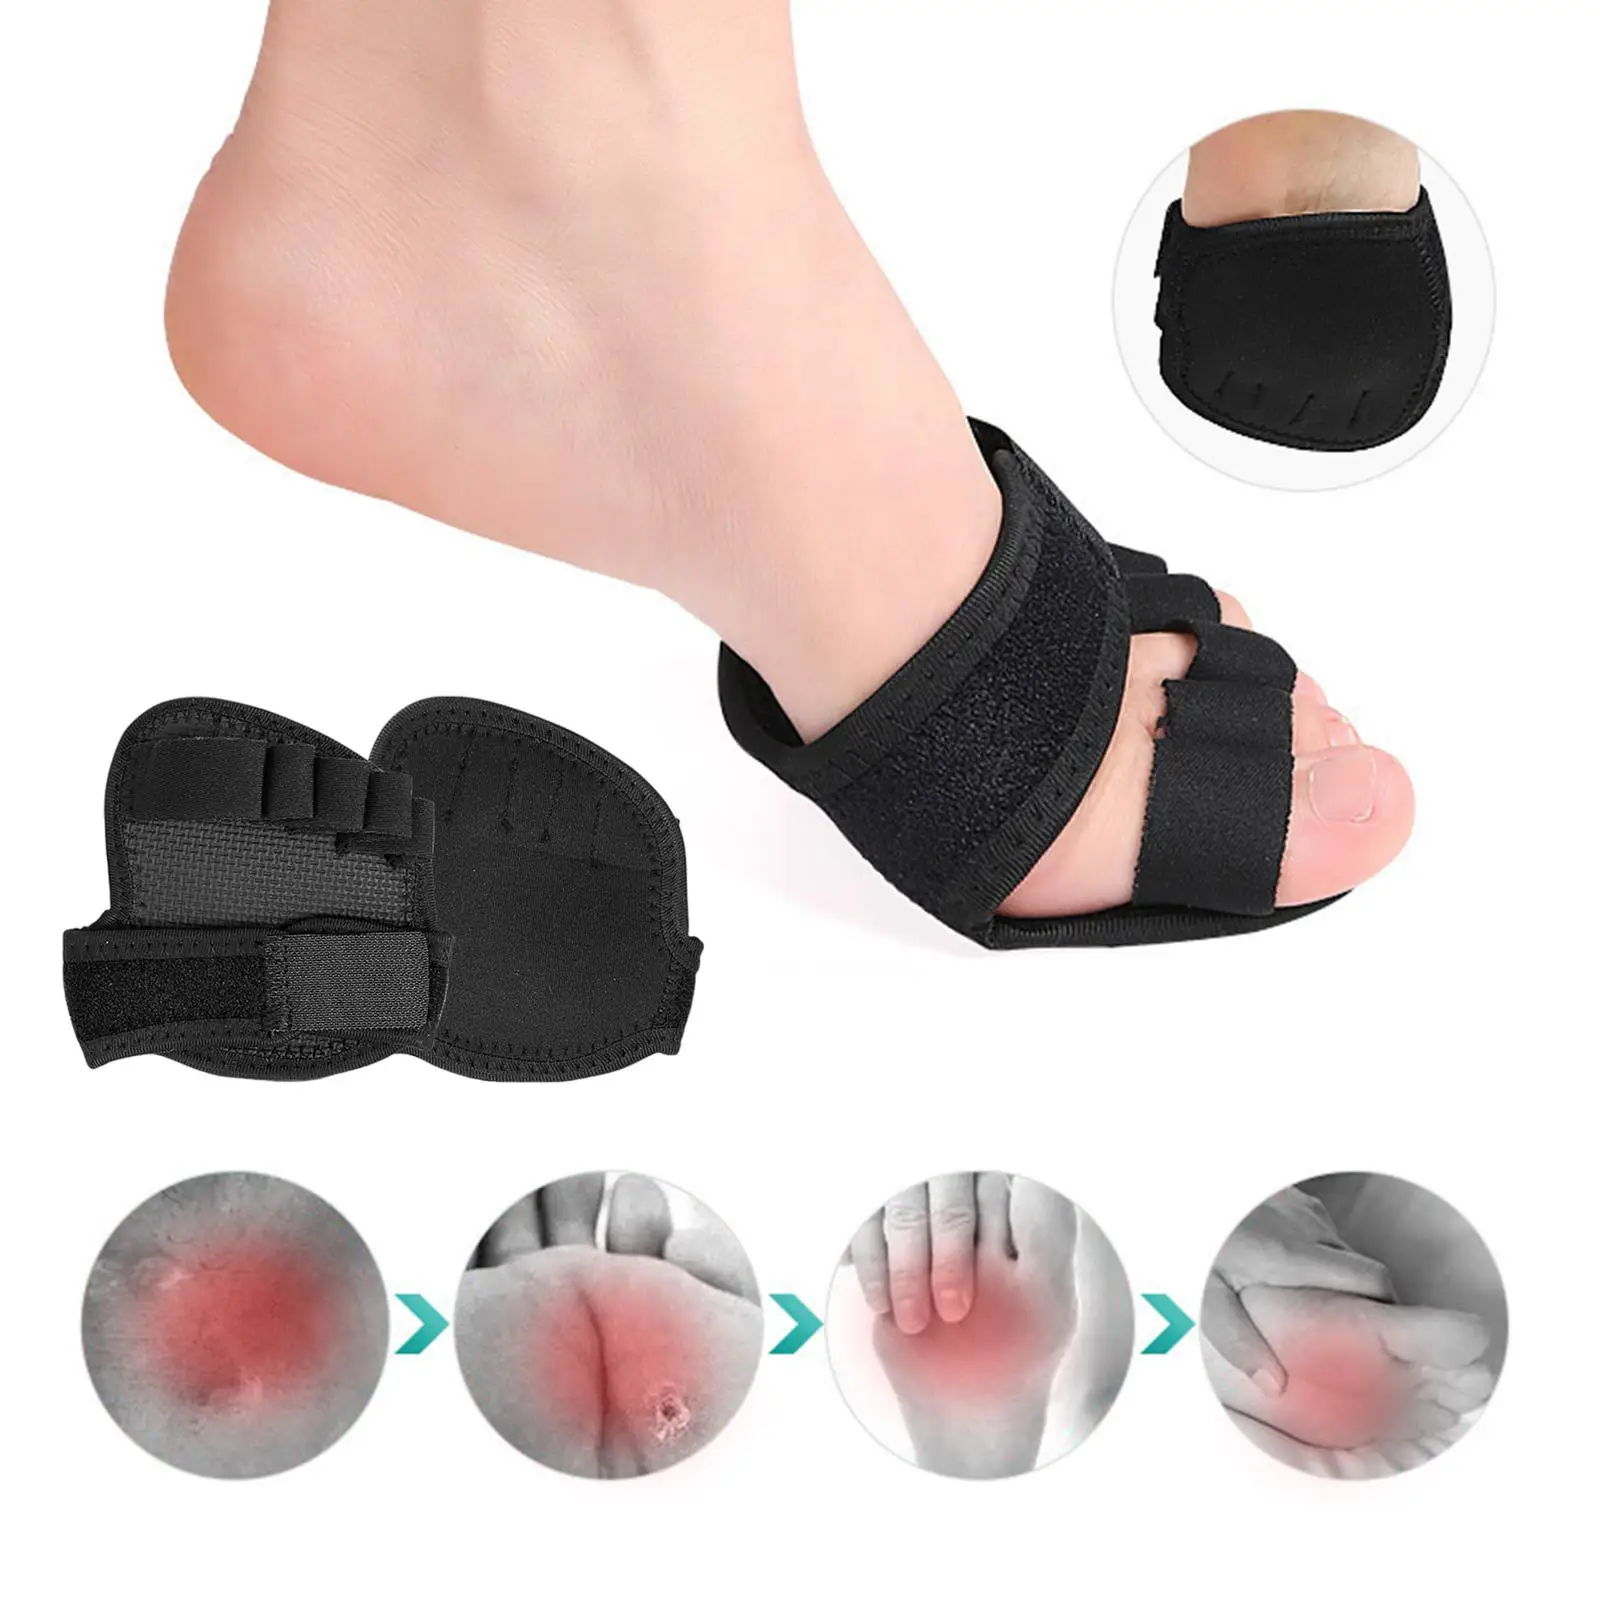 Universal Forefoot Pads Sbr Toe Separator     Toement  Valgus  Crooked Toes for Unisex